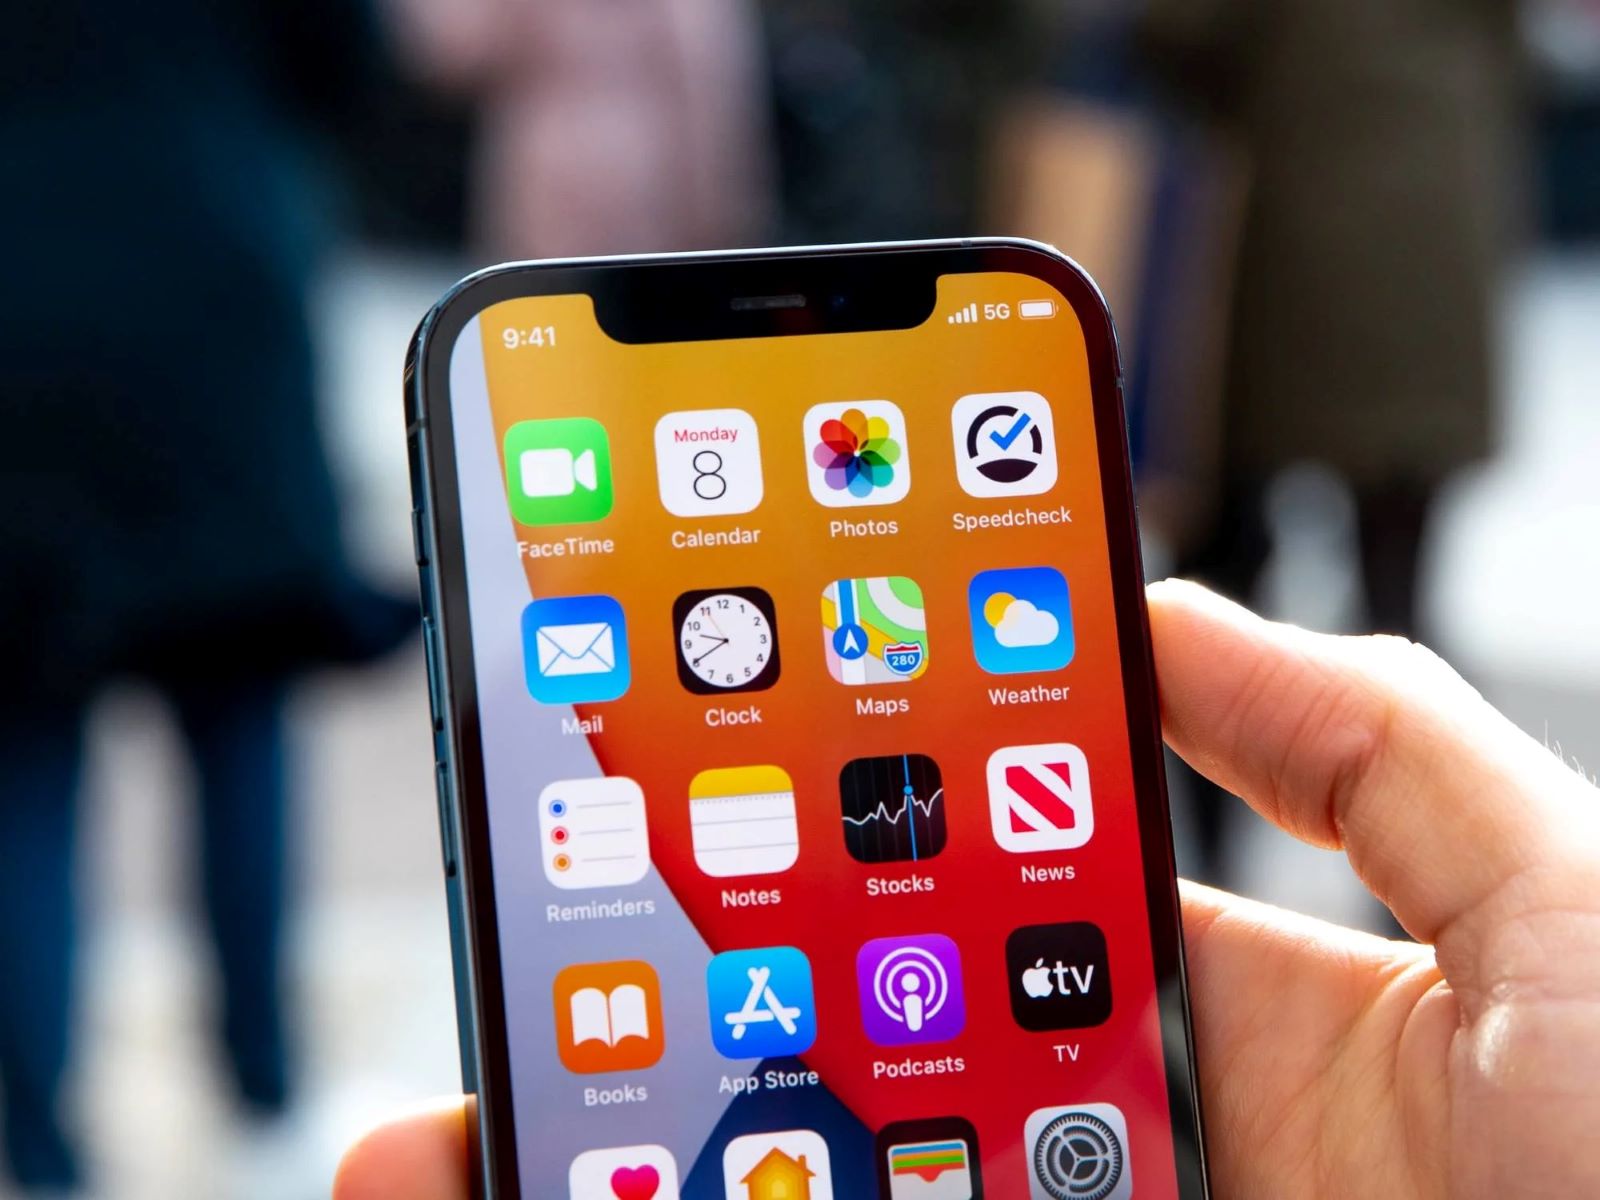 Activating 5G: Enabling 5G Connectivity On Your IPhone 11